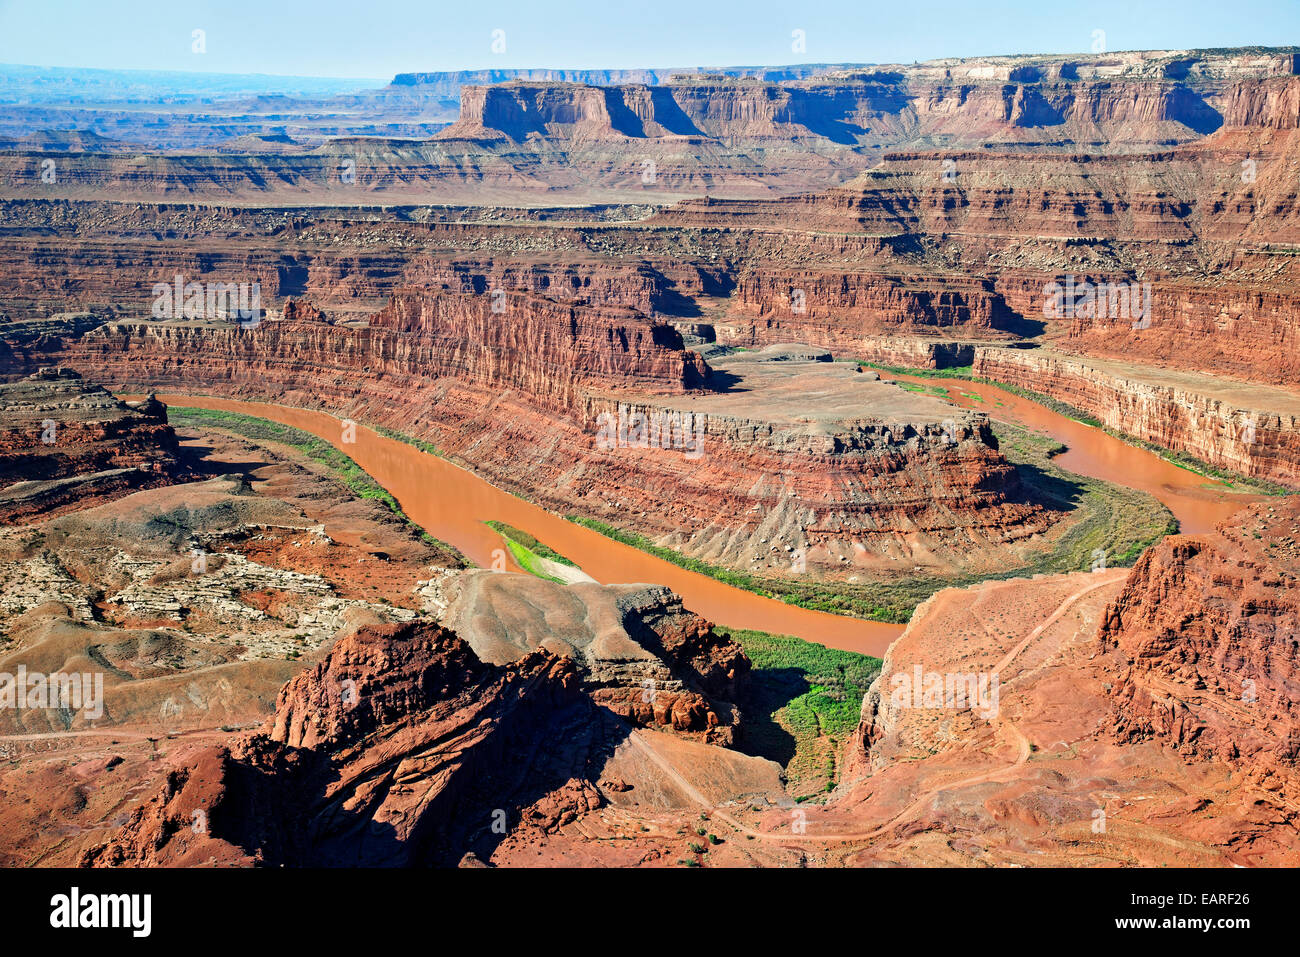 Rugged canyons and the Colorado River at Death Horse Point, Canyonlands National Park, Utah, United States Stock Photo